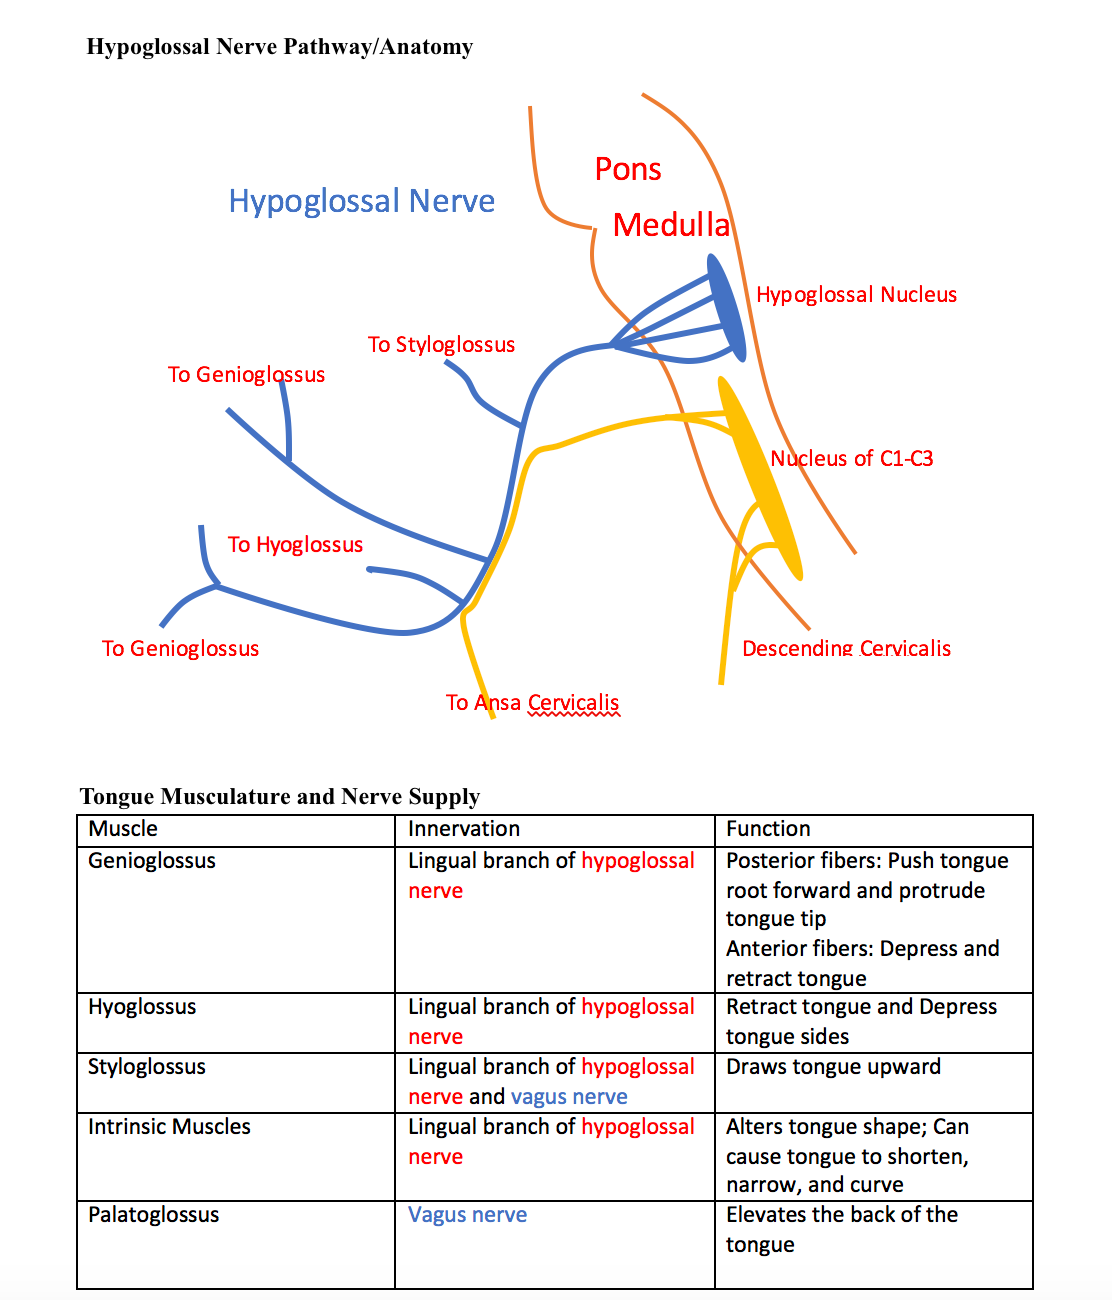 <p>Hypoglossal Pathway/Anatomy, Tongue Musculature and Nerve Supply Table.</p>